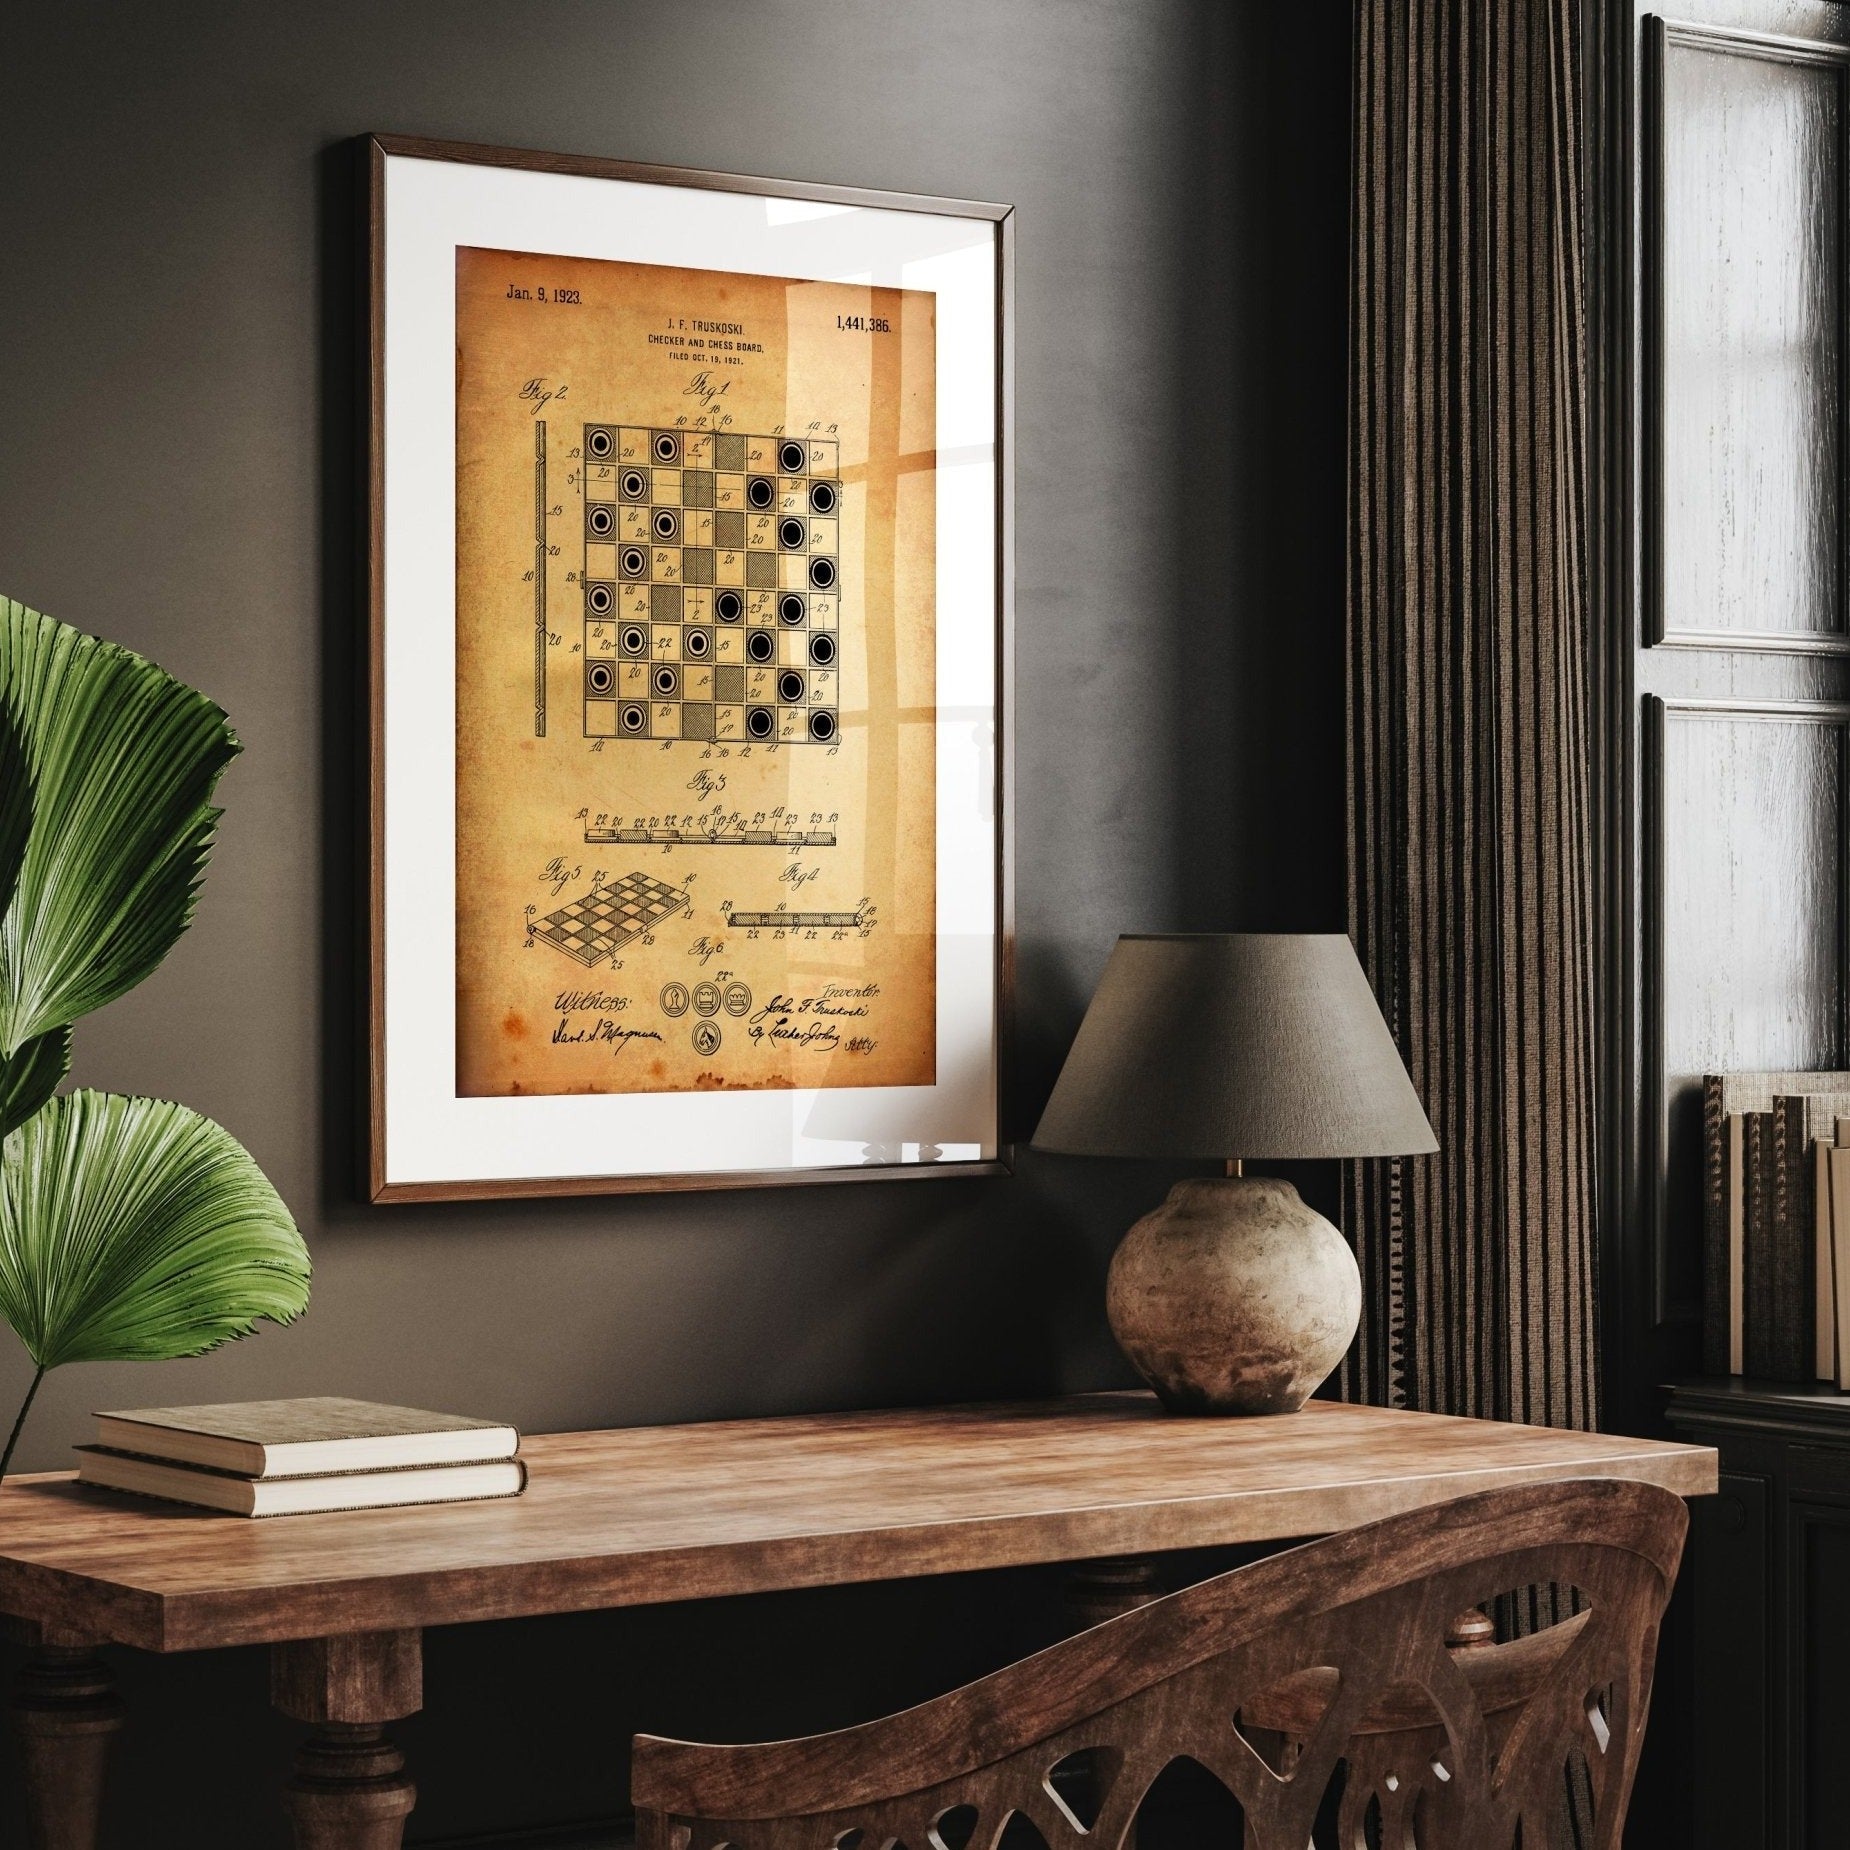 Checkers Draughts And Chessboard 1923 Patent Print - Magic Posters